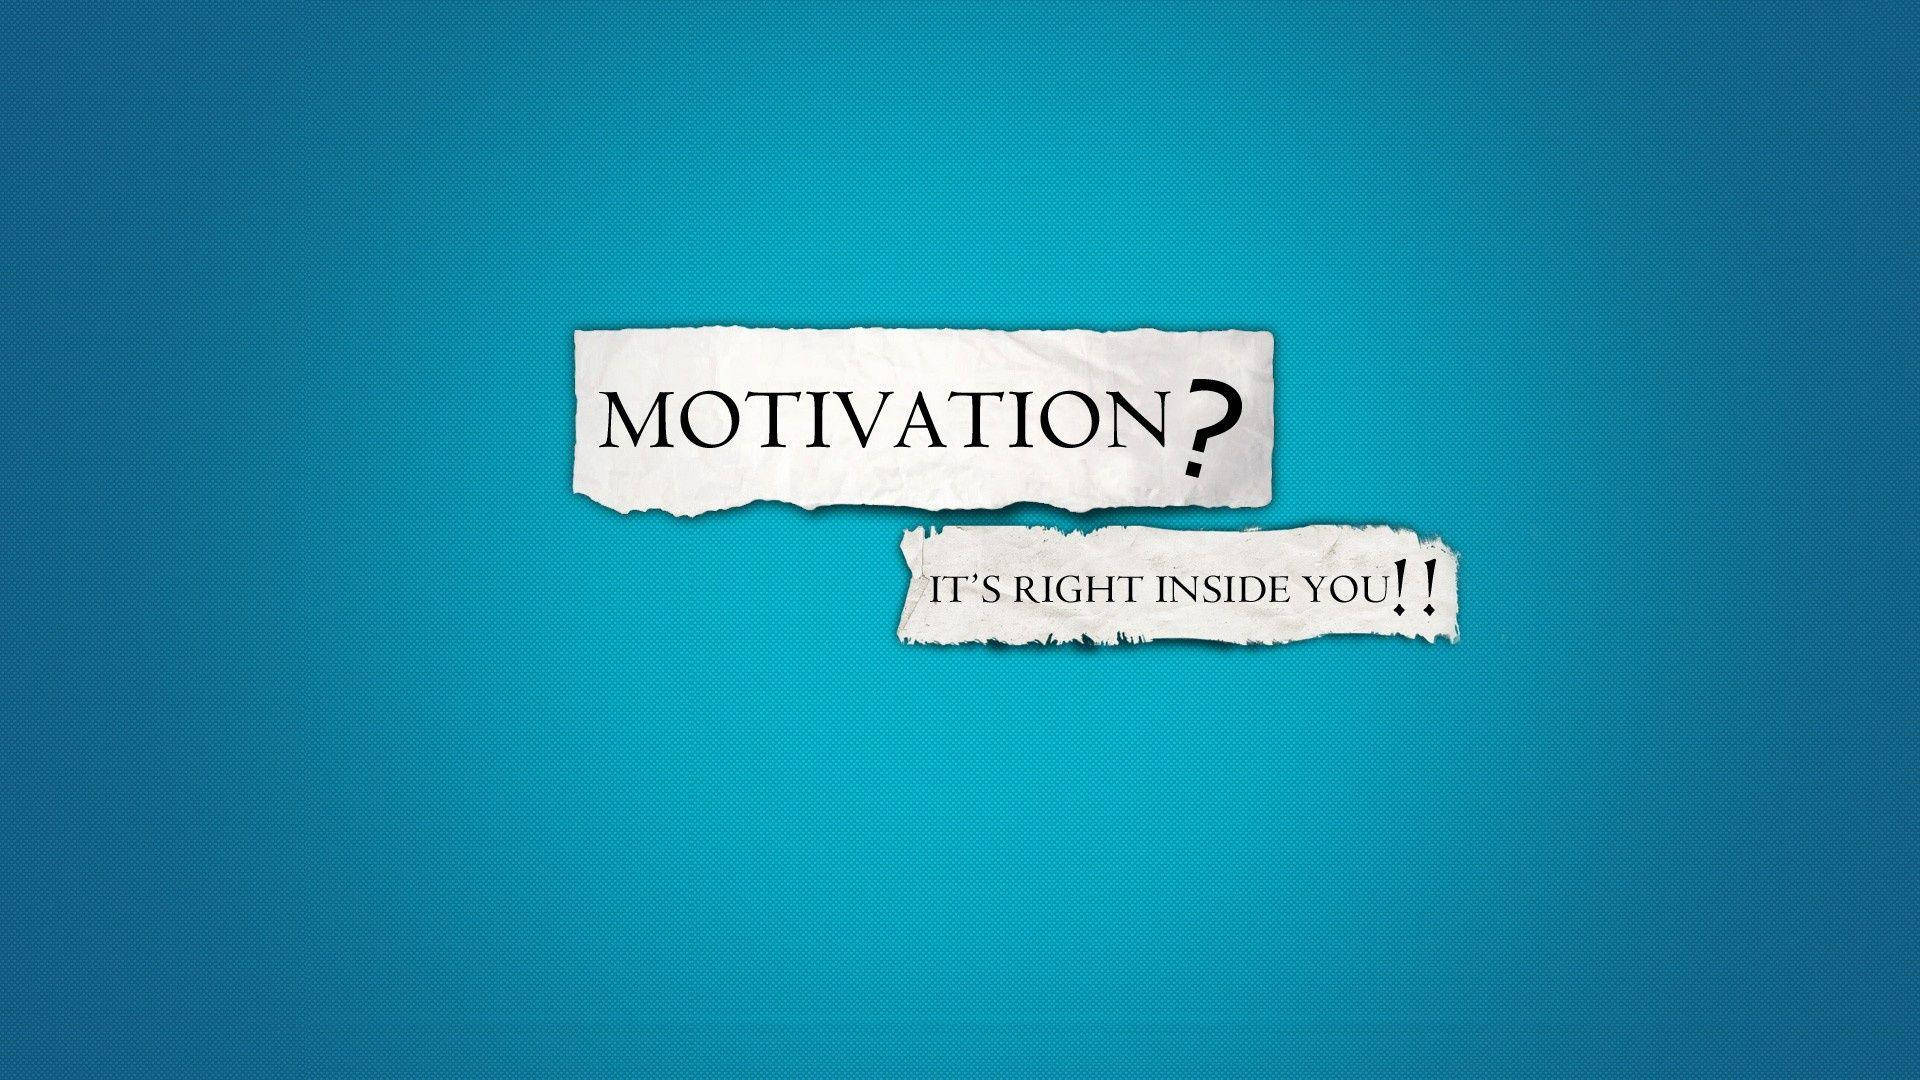 Motivational Hd Image In Blue Background Wallpaper